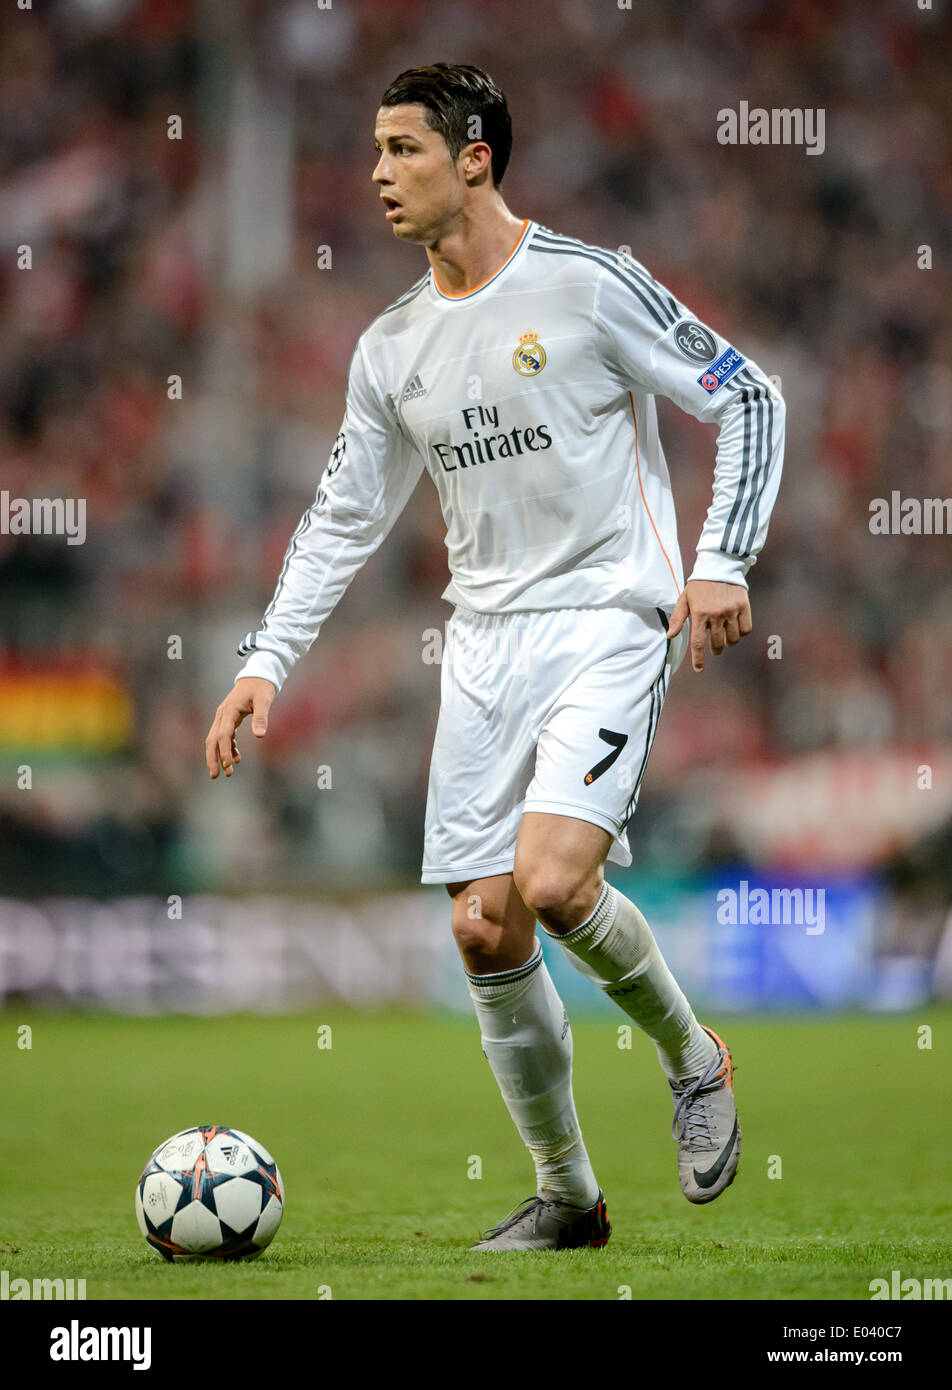 Munich, Germany. 29th Apr, 2014. Madrid's Cristiano Ronaldo plays the ball  during the Champions League semifinal second leg match between Bayern  Munich and Real Madrid at Allianz Arena in Munich, Germany, 29